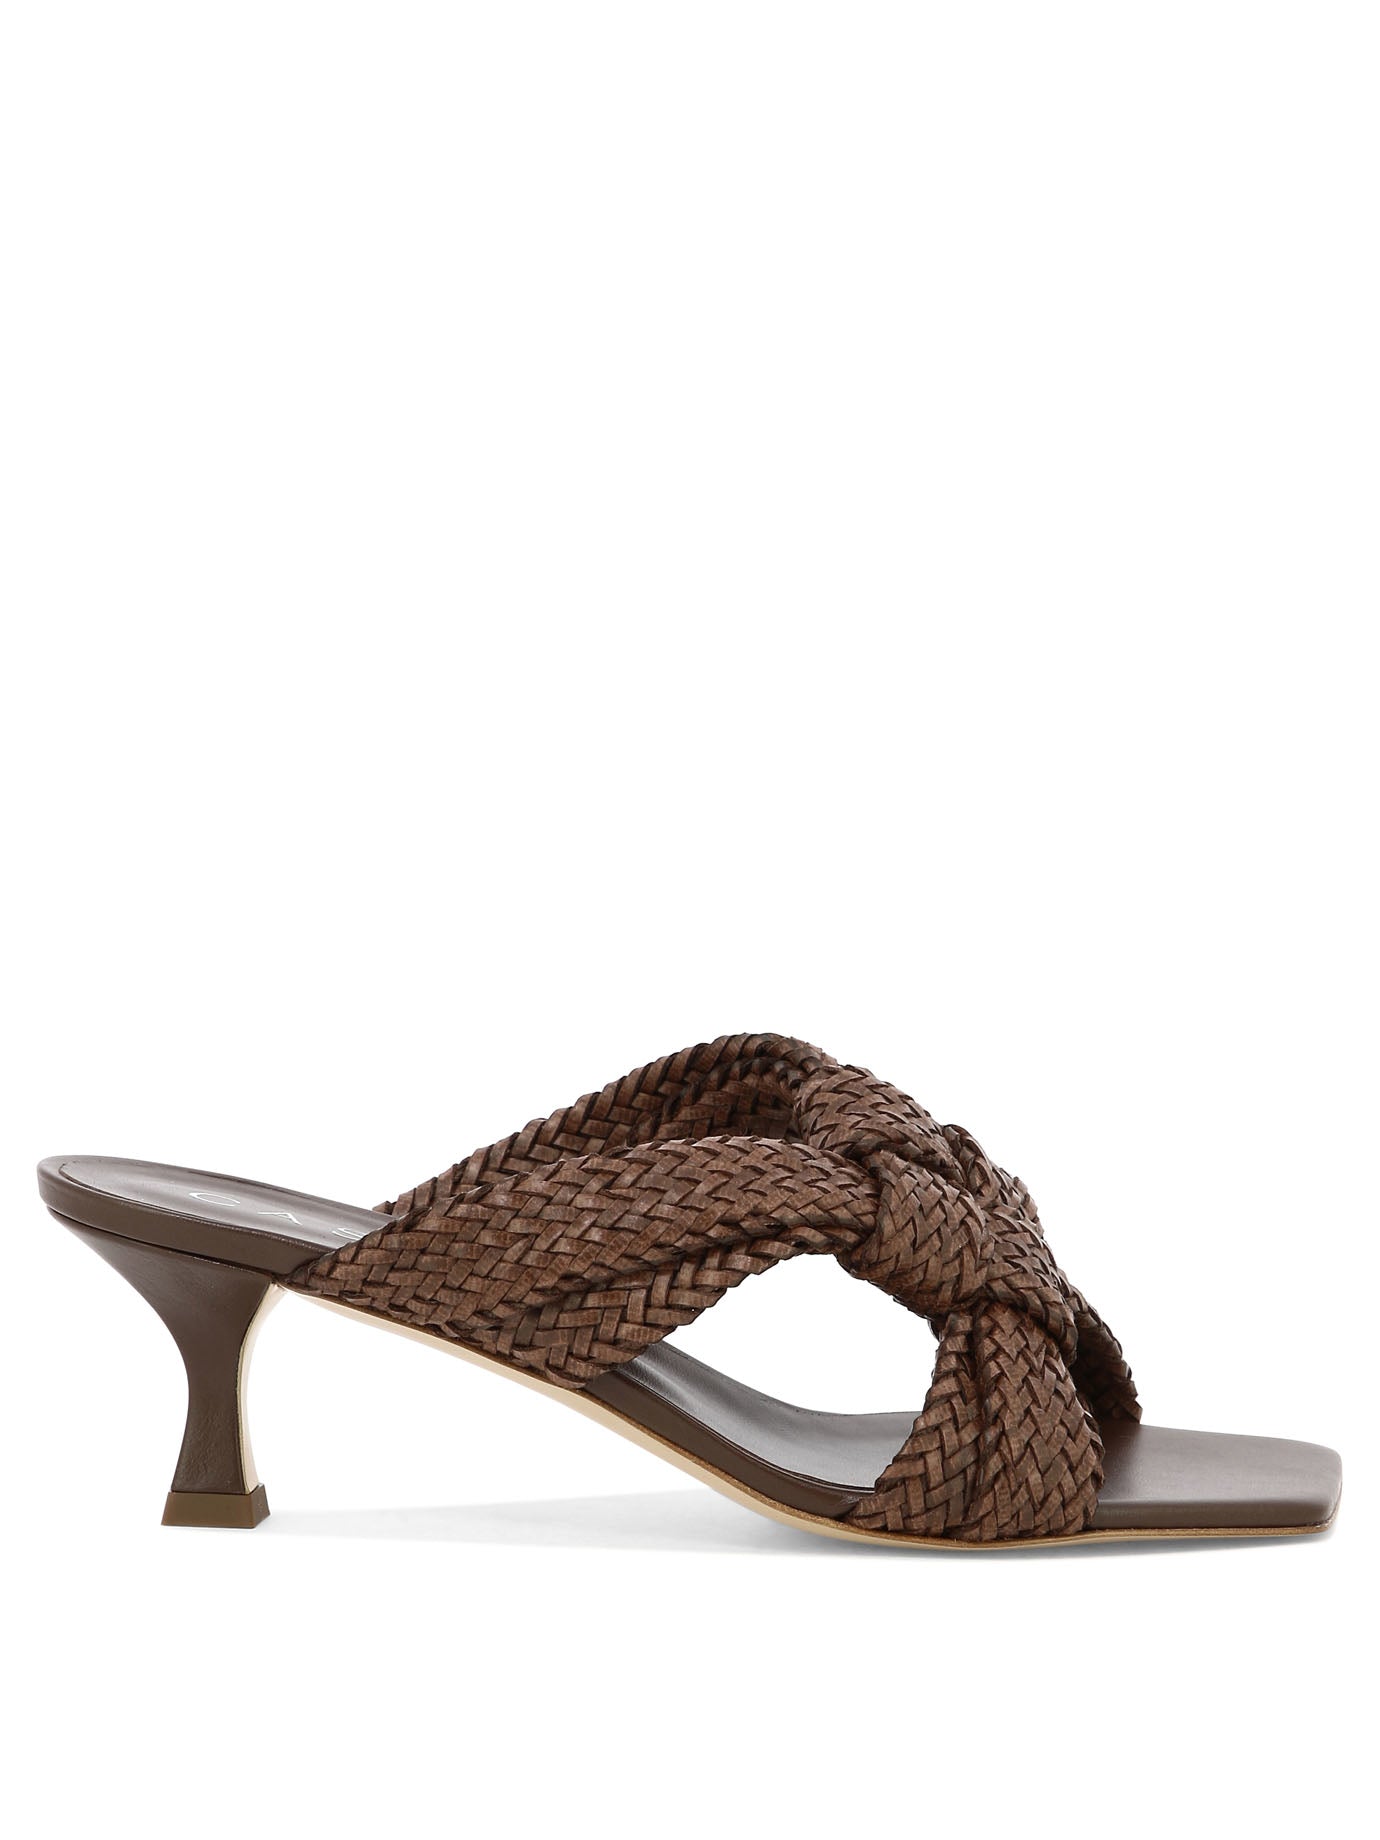 Casadei Stylish Brown Leather Sandals For Women